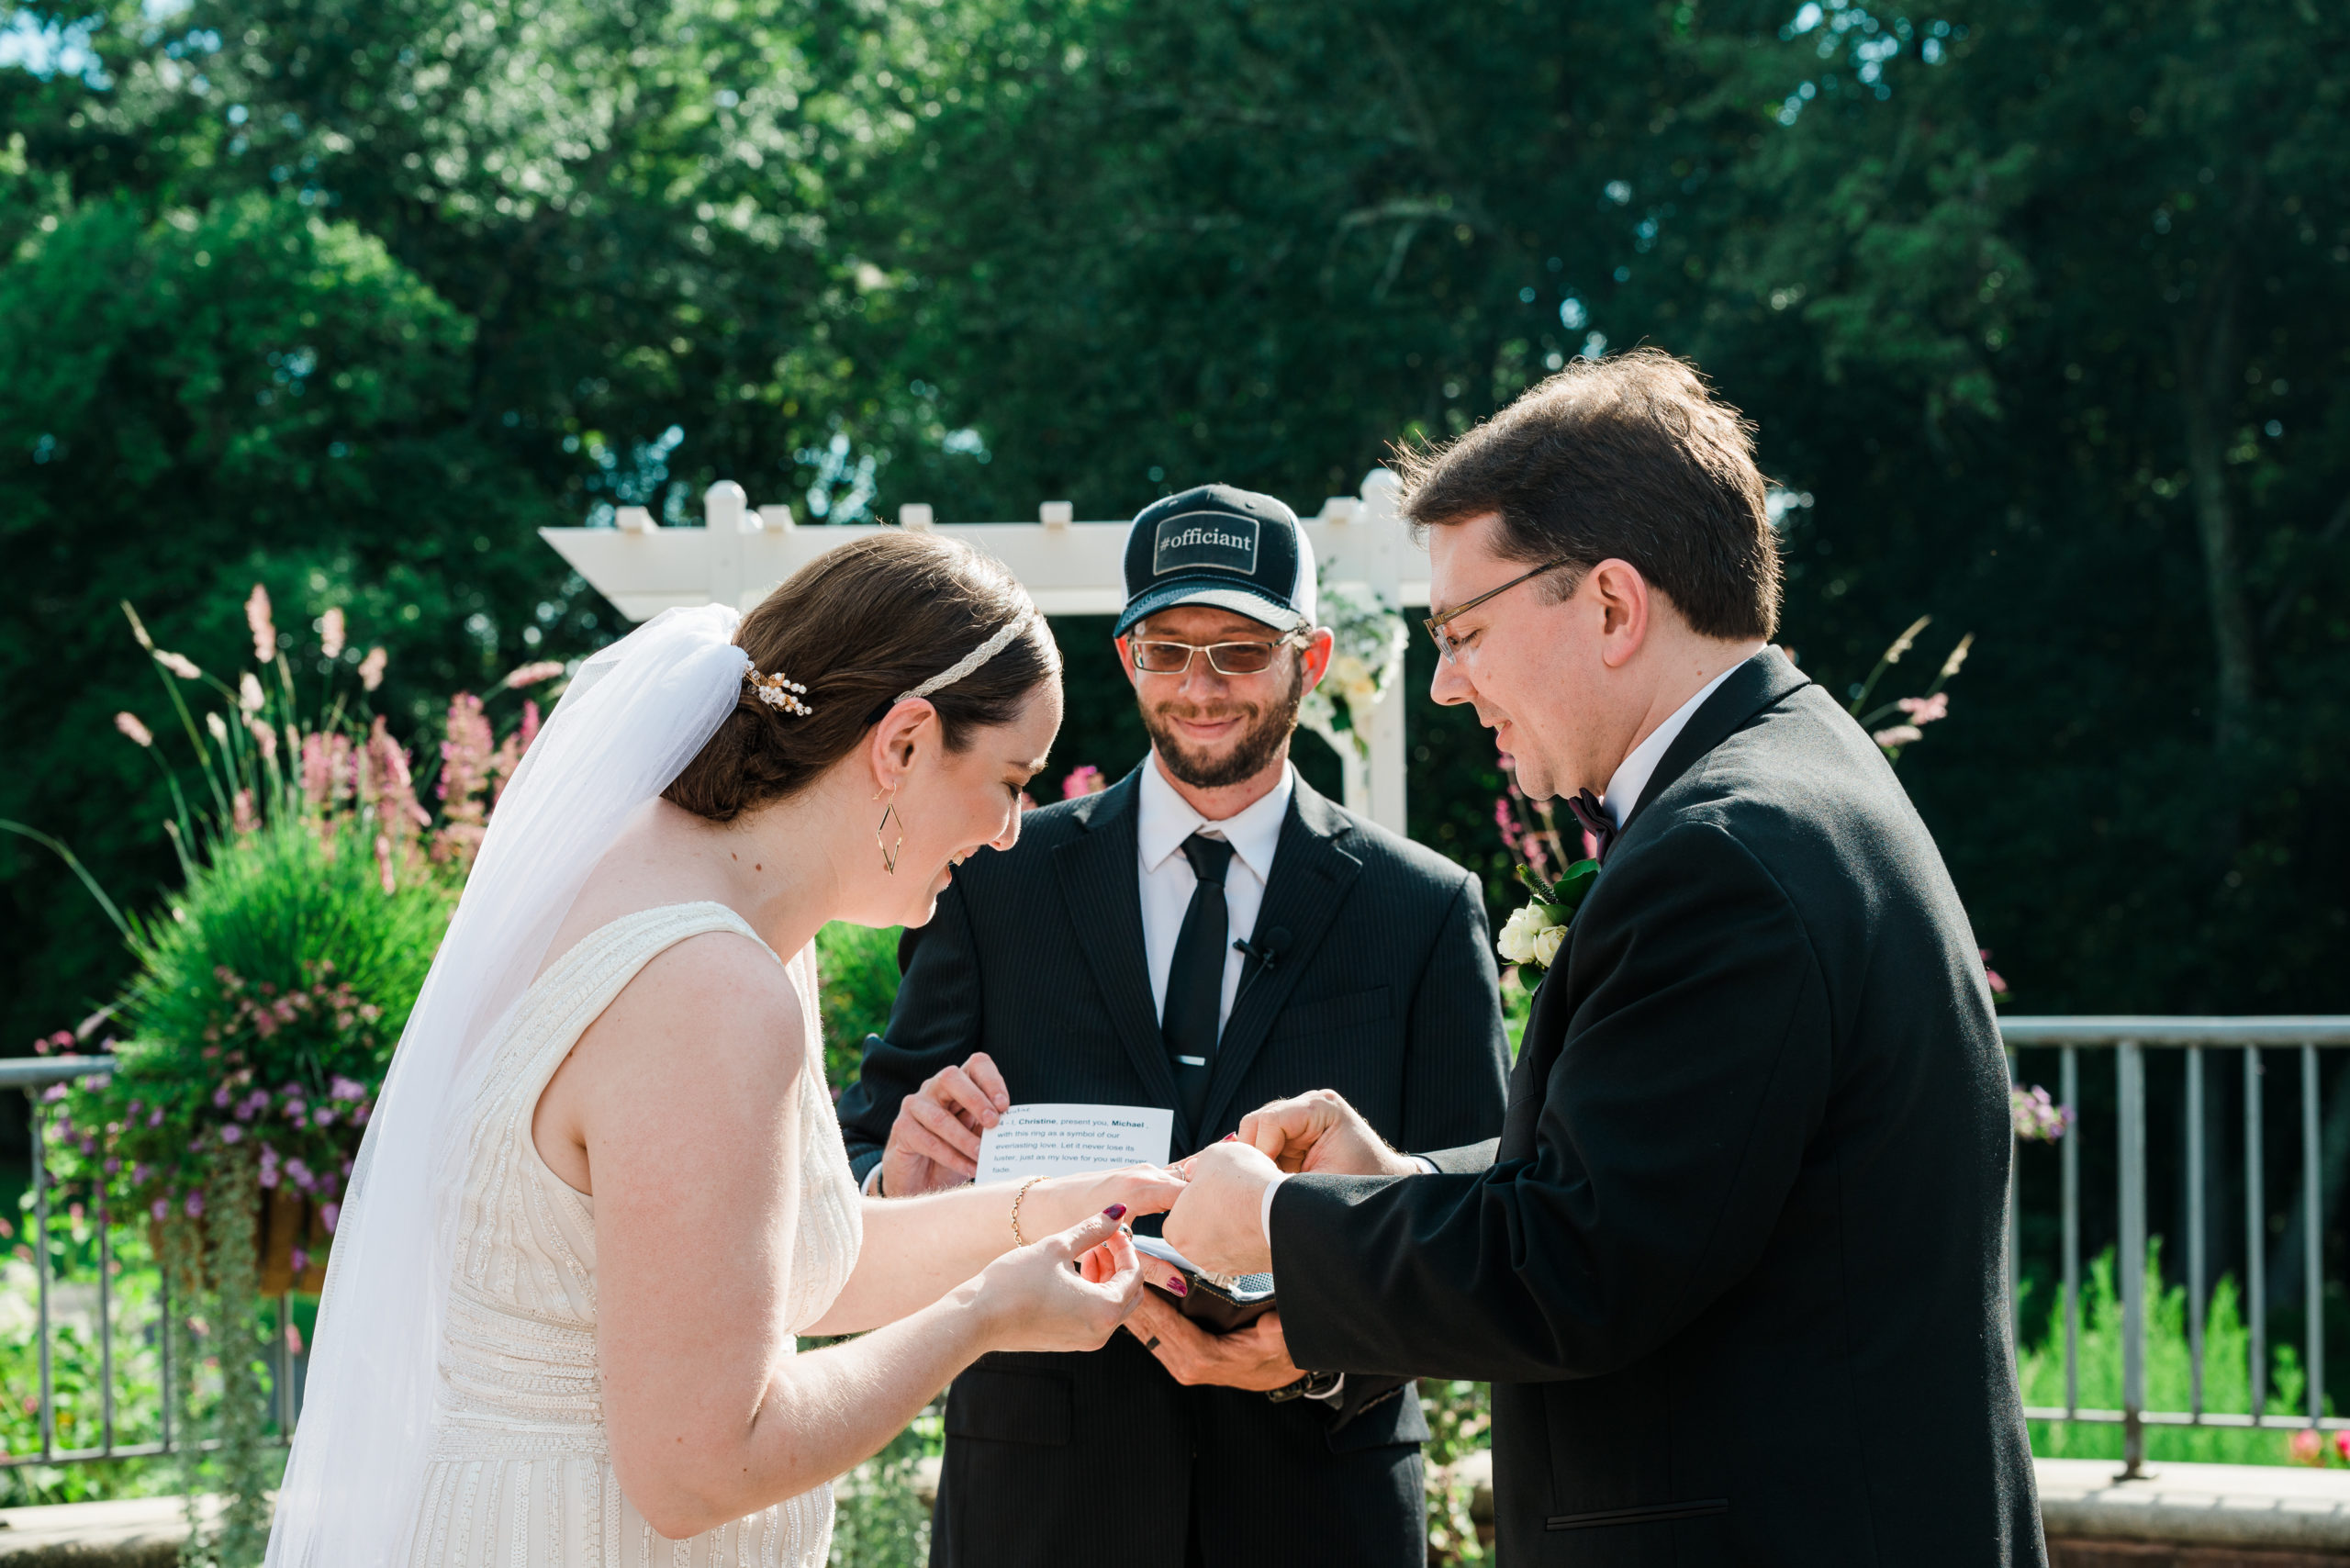 Bride and groom exchanging rings at the Atrium at Meadowlark Botanical Gardens